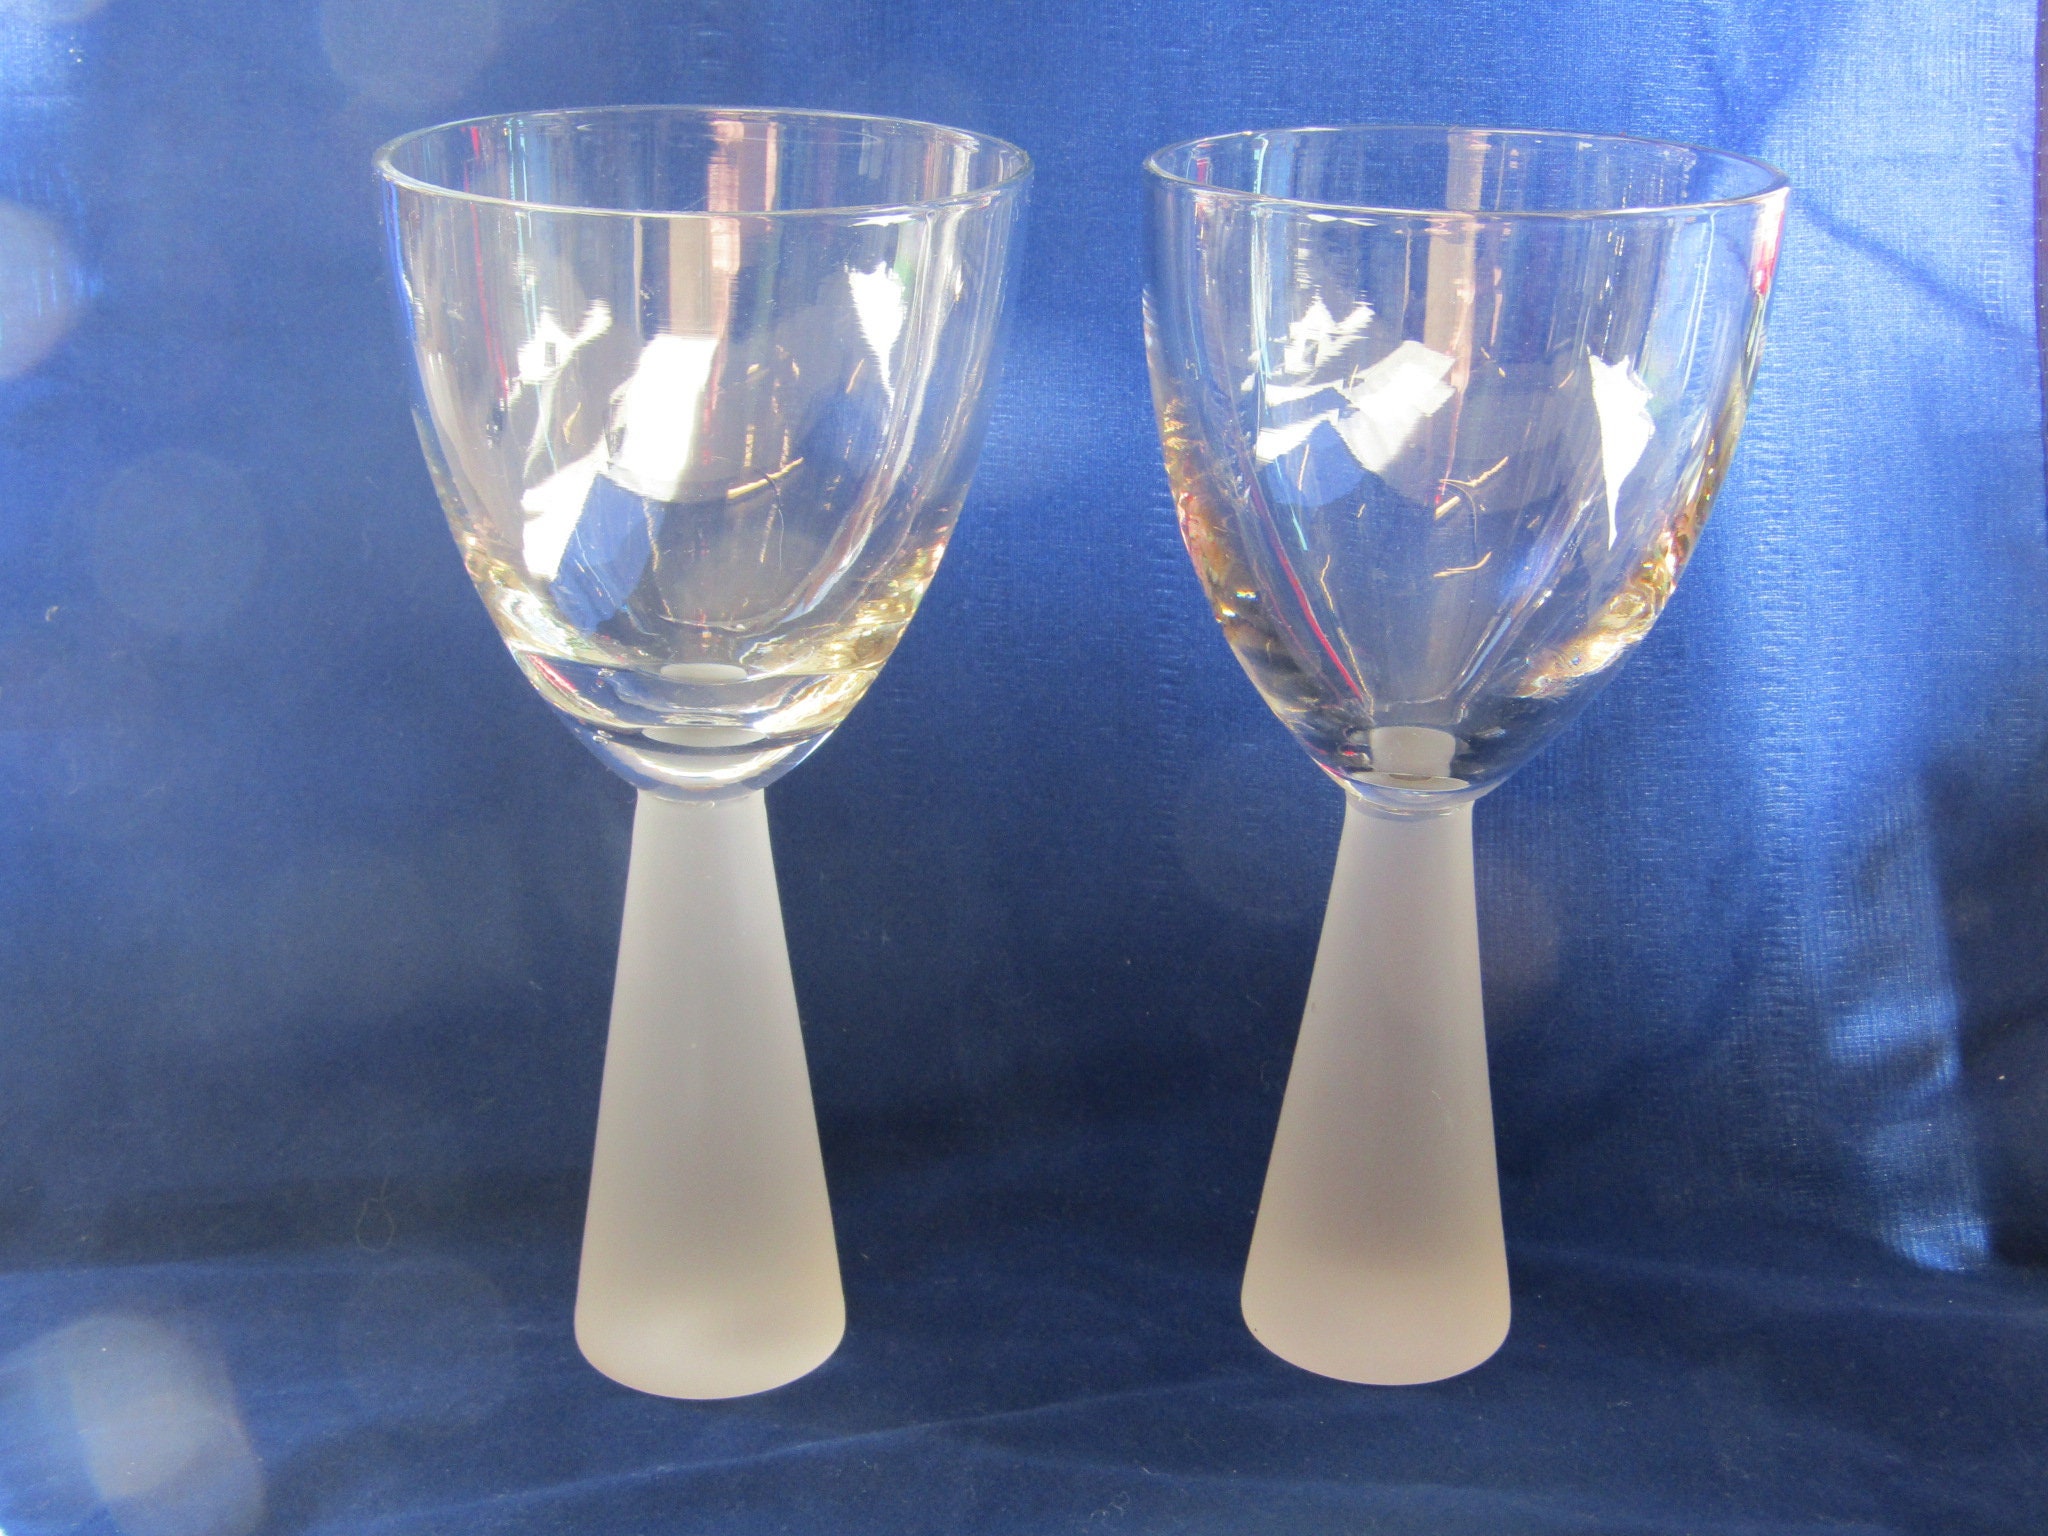 Frosted stem wine glasses